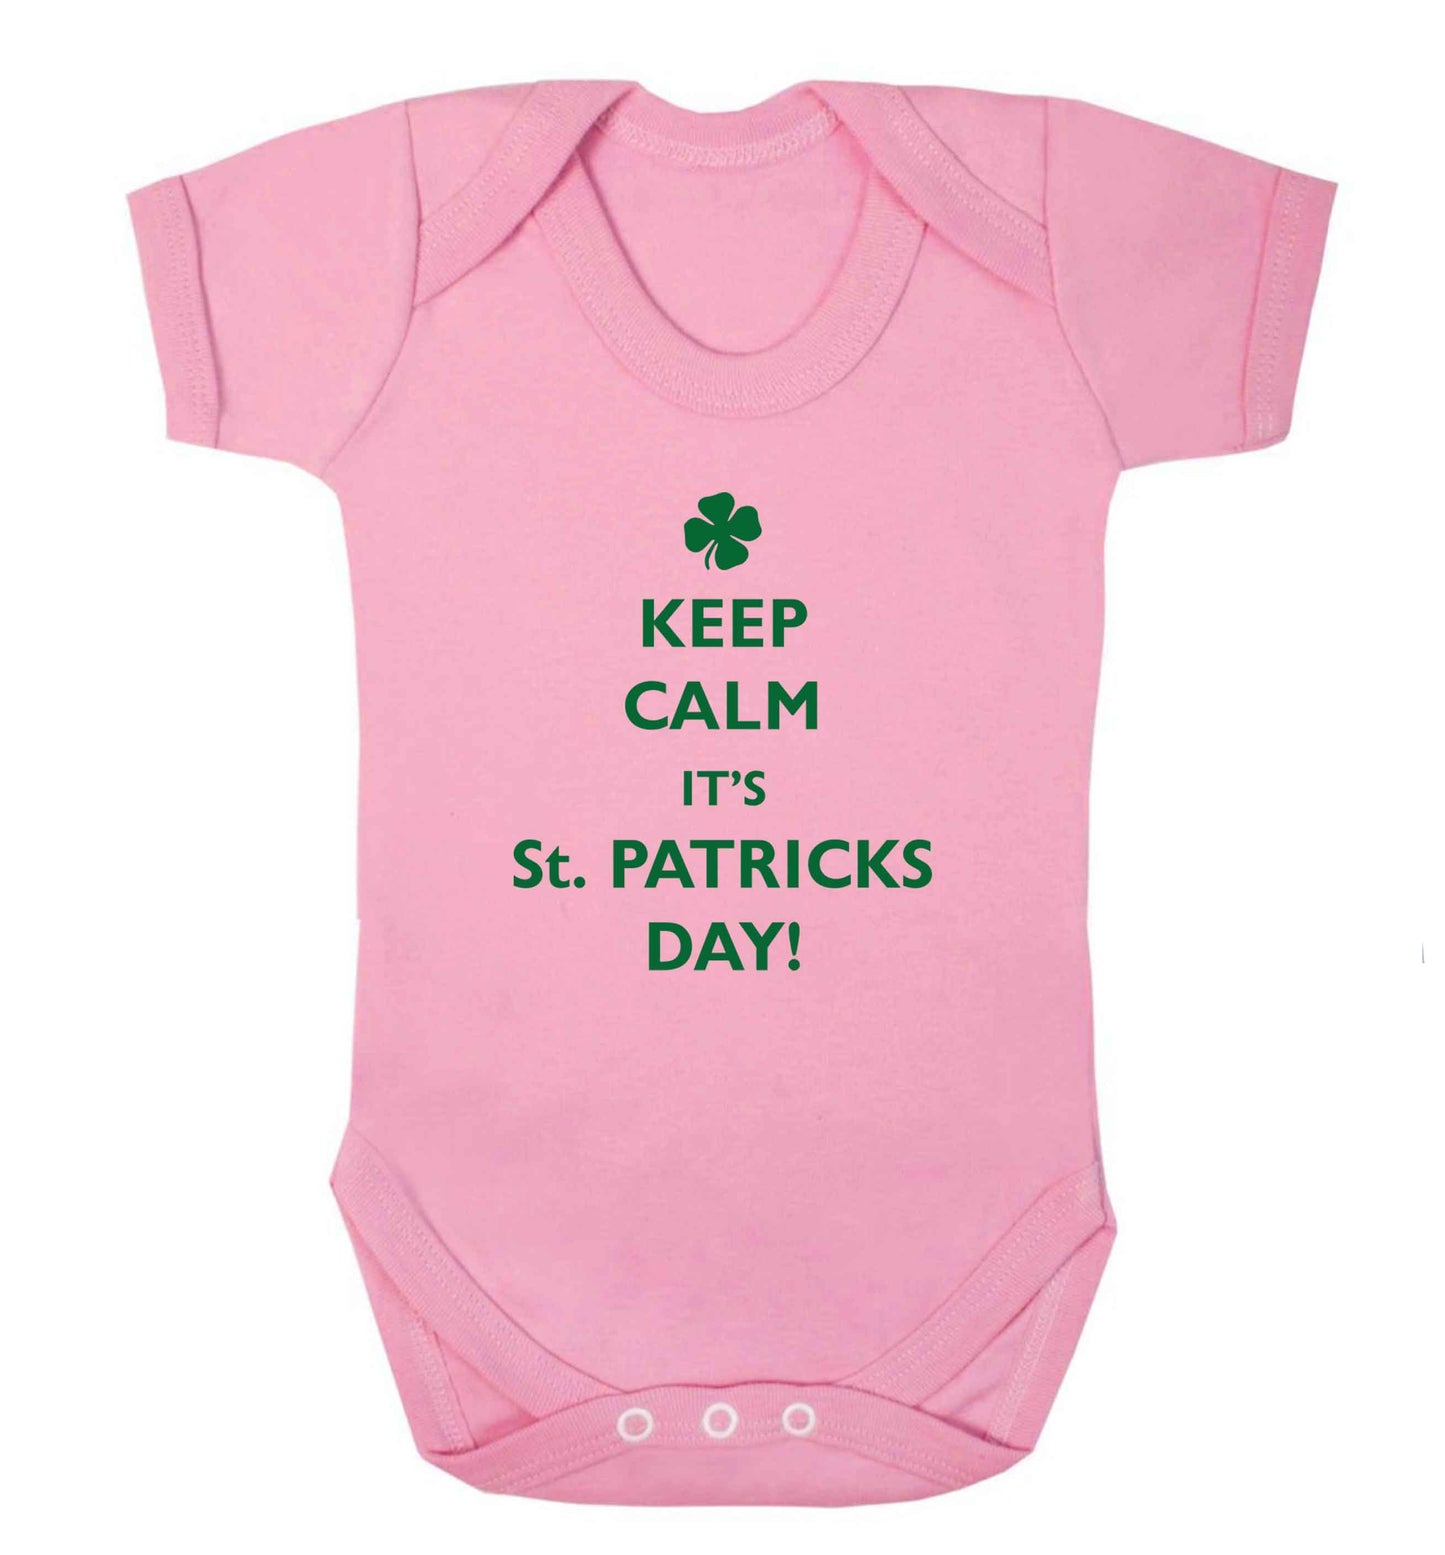 I can't keep calm it's St.Patricks day baby vest pale pink 18-24 months